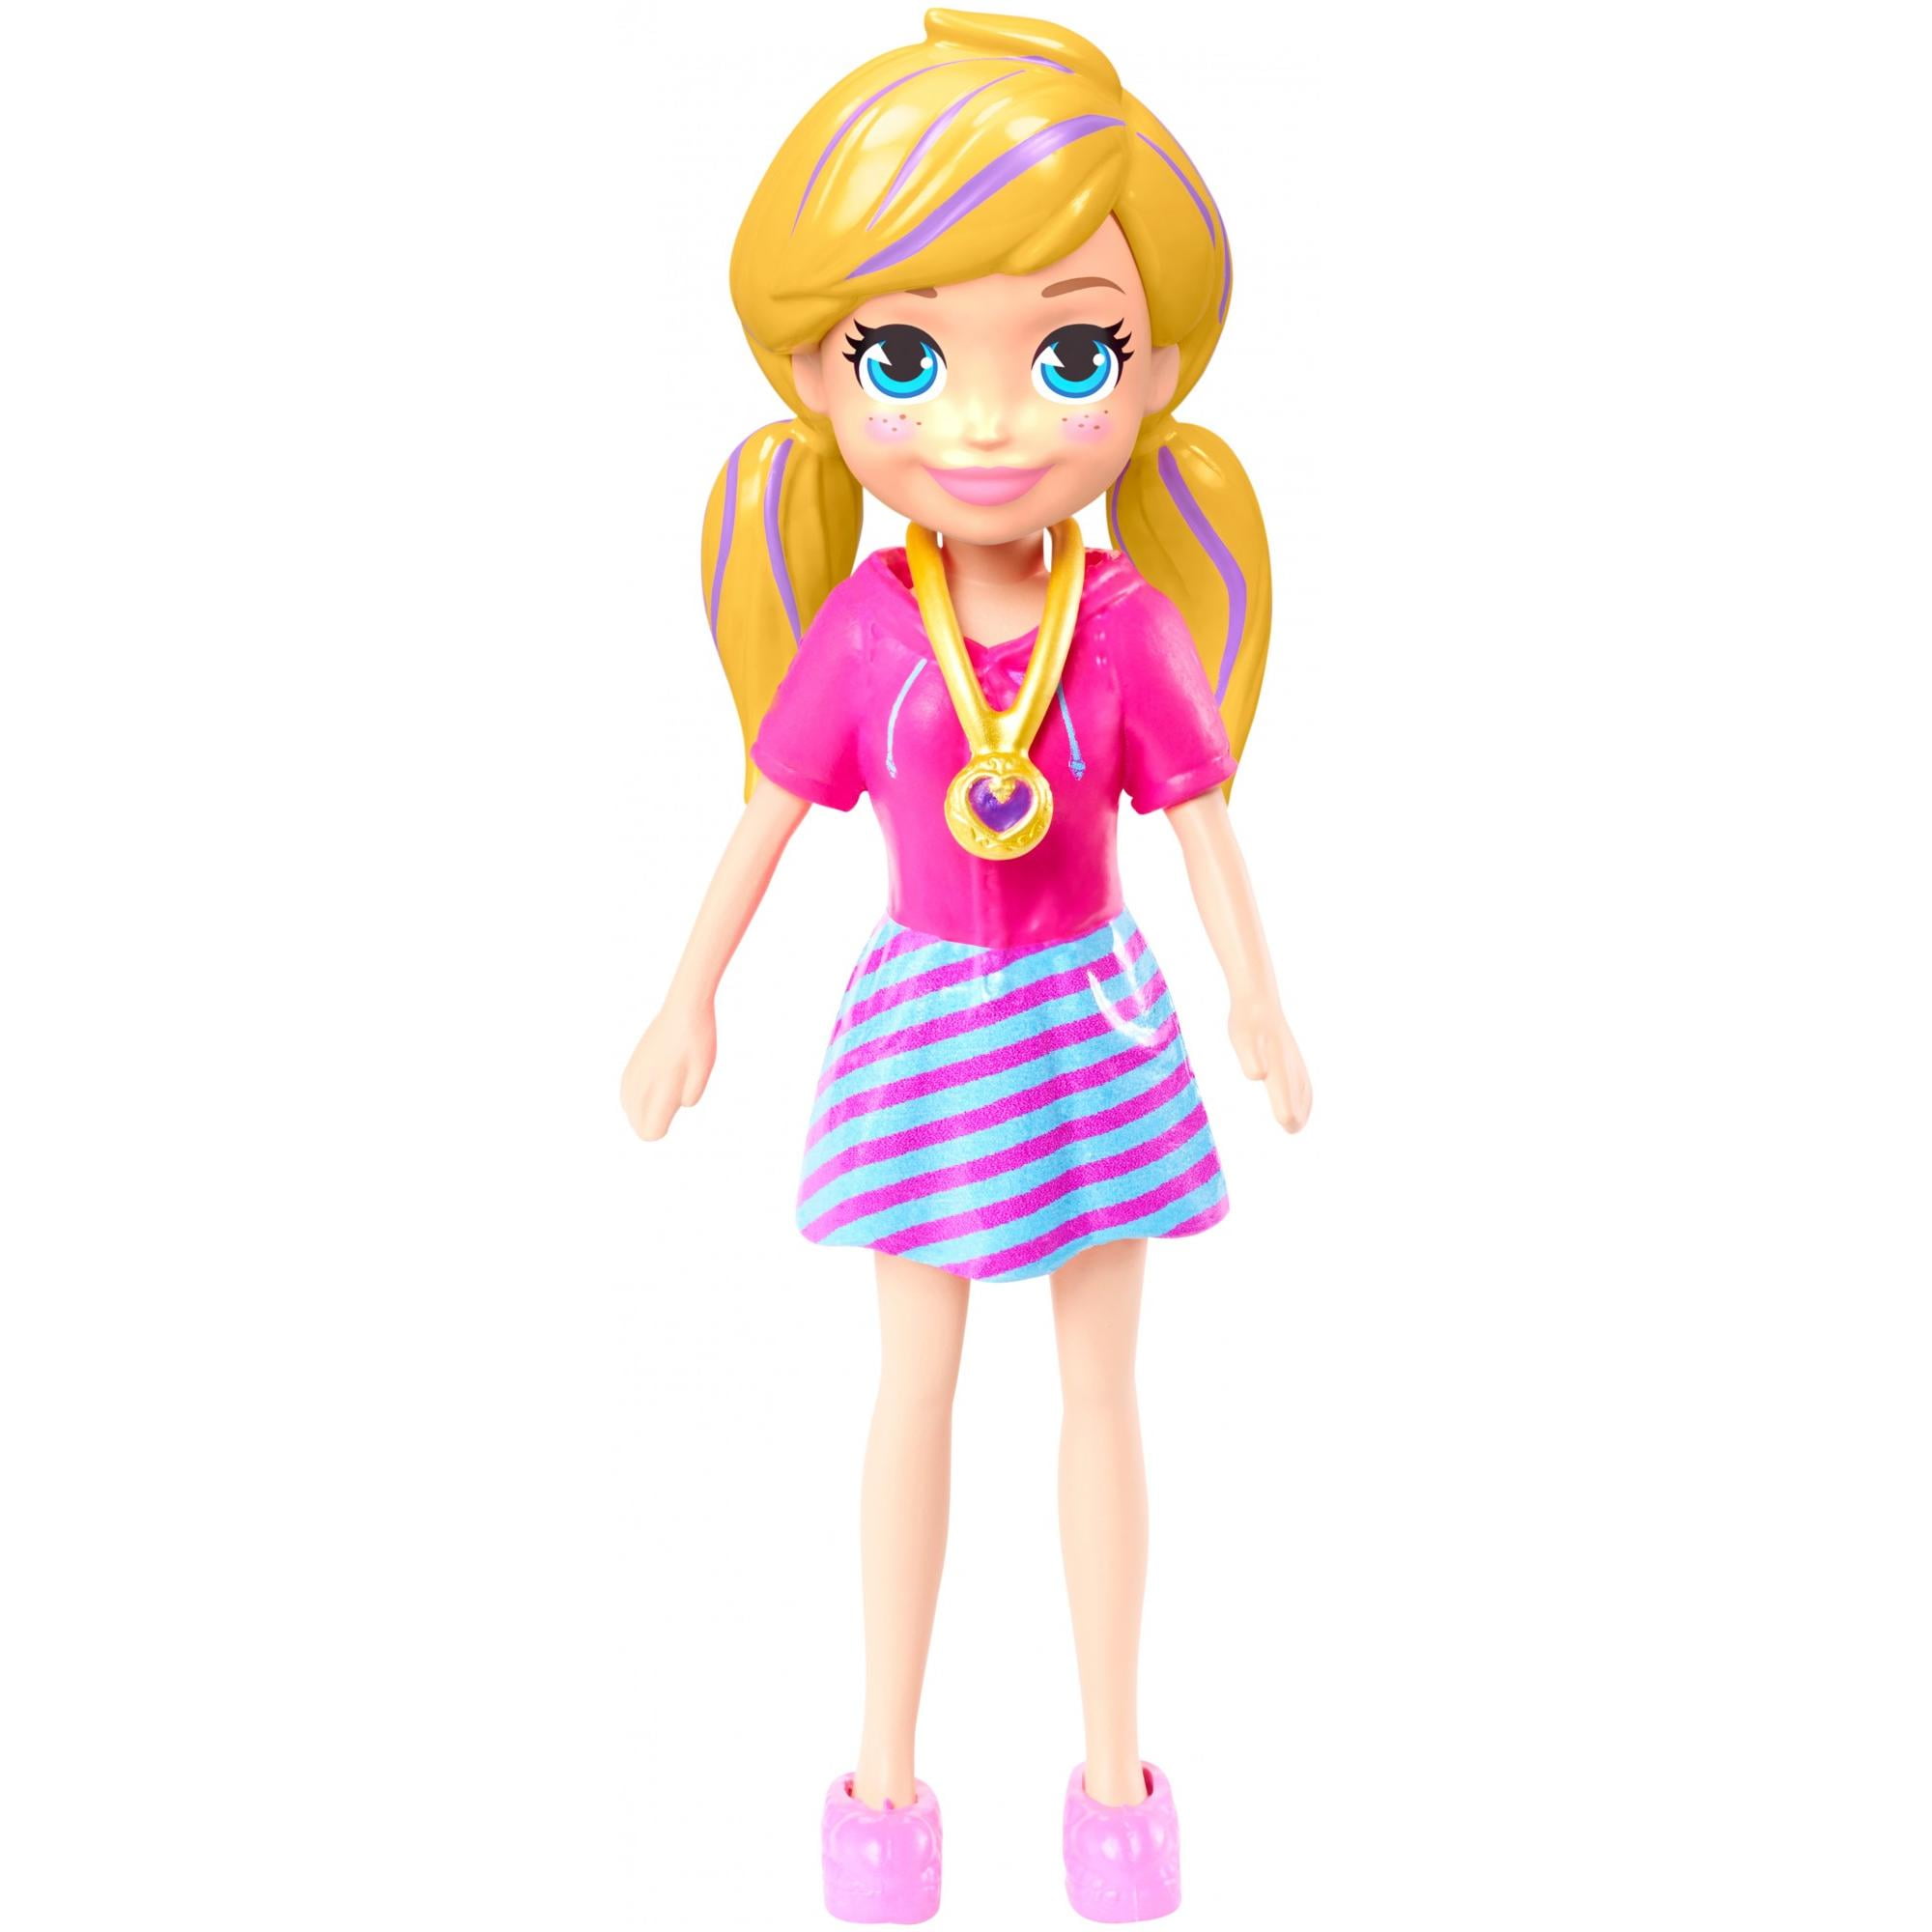 Polly Pocket Impulse Doll Details about   NEW 4 GLH67 